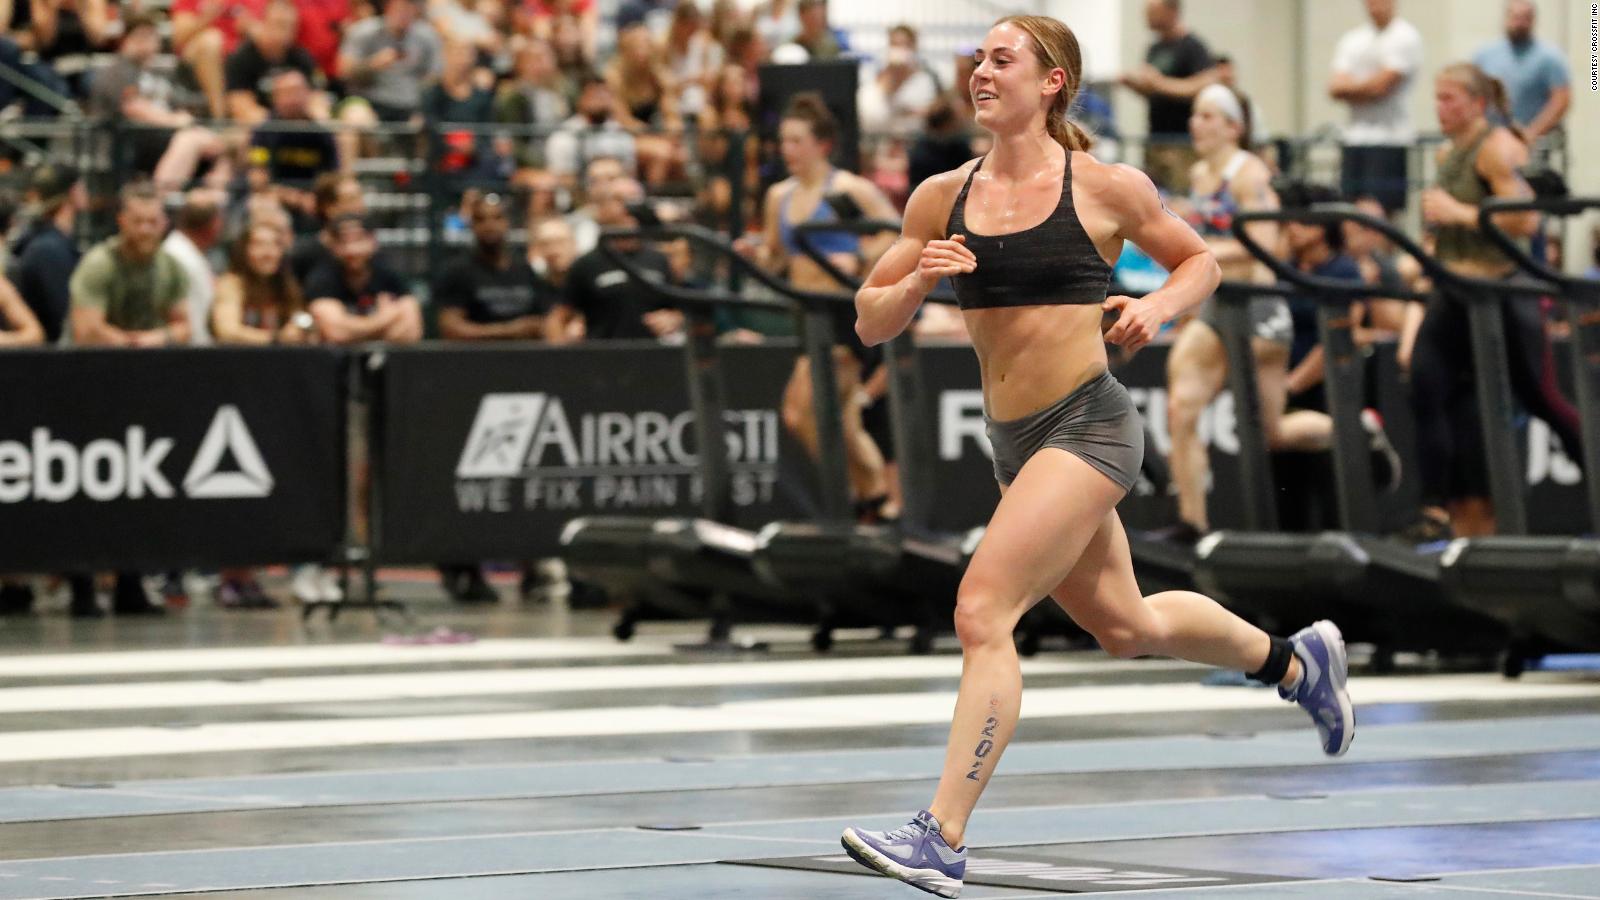 Brooke Wells The CrossFit star who was born to compete CNN